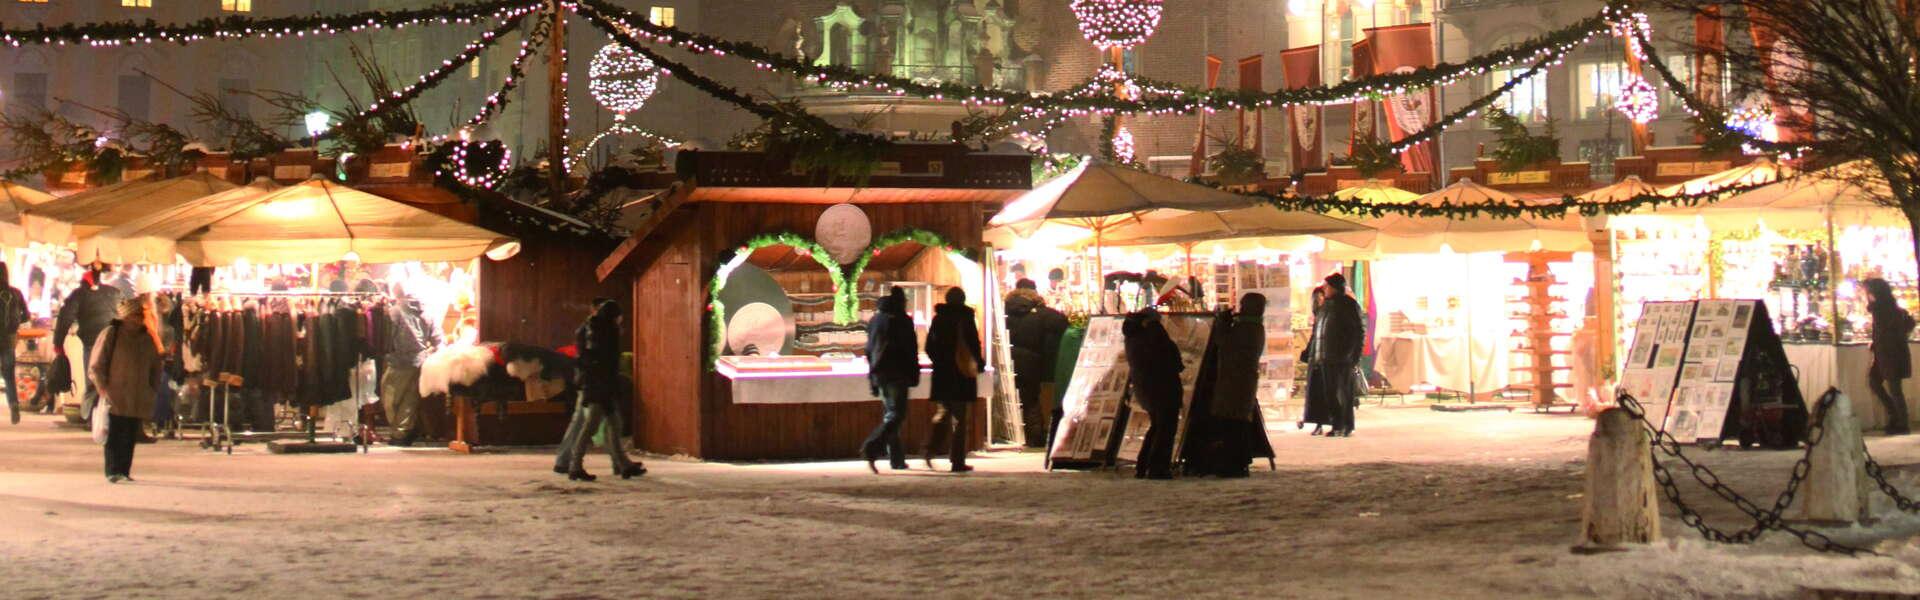 Stalls in the Main Square in Krakow at night.